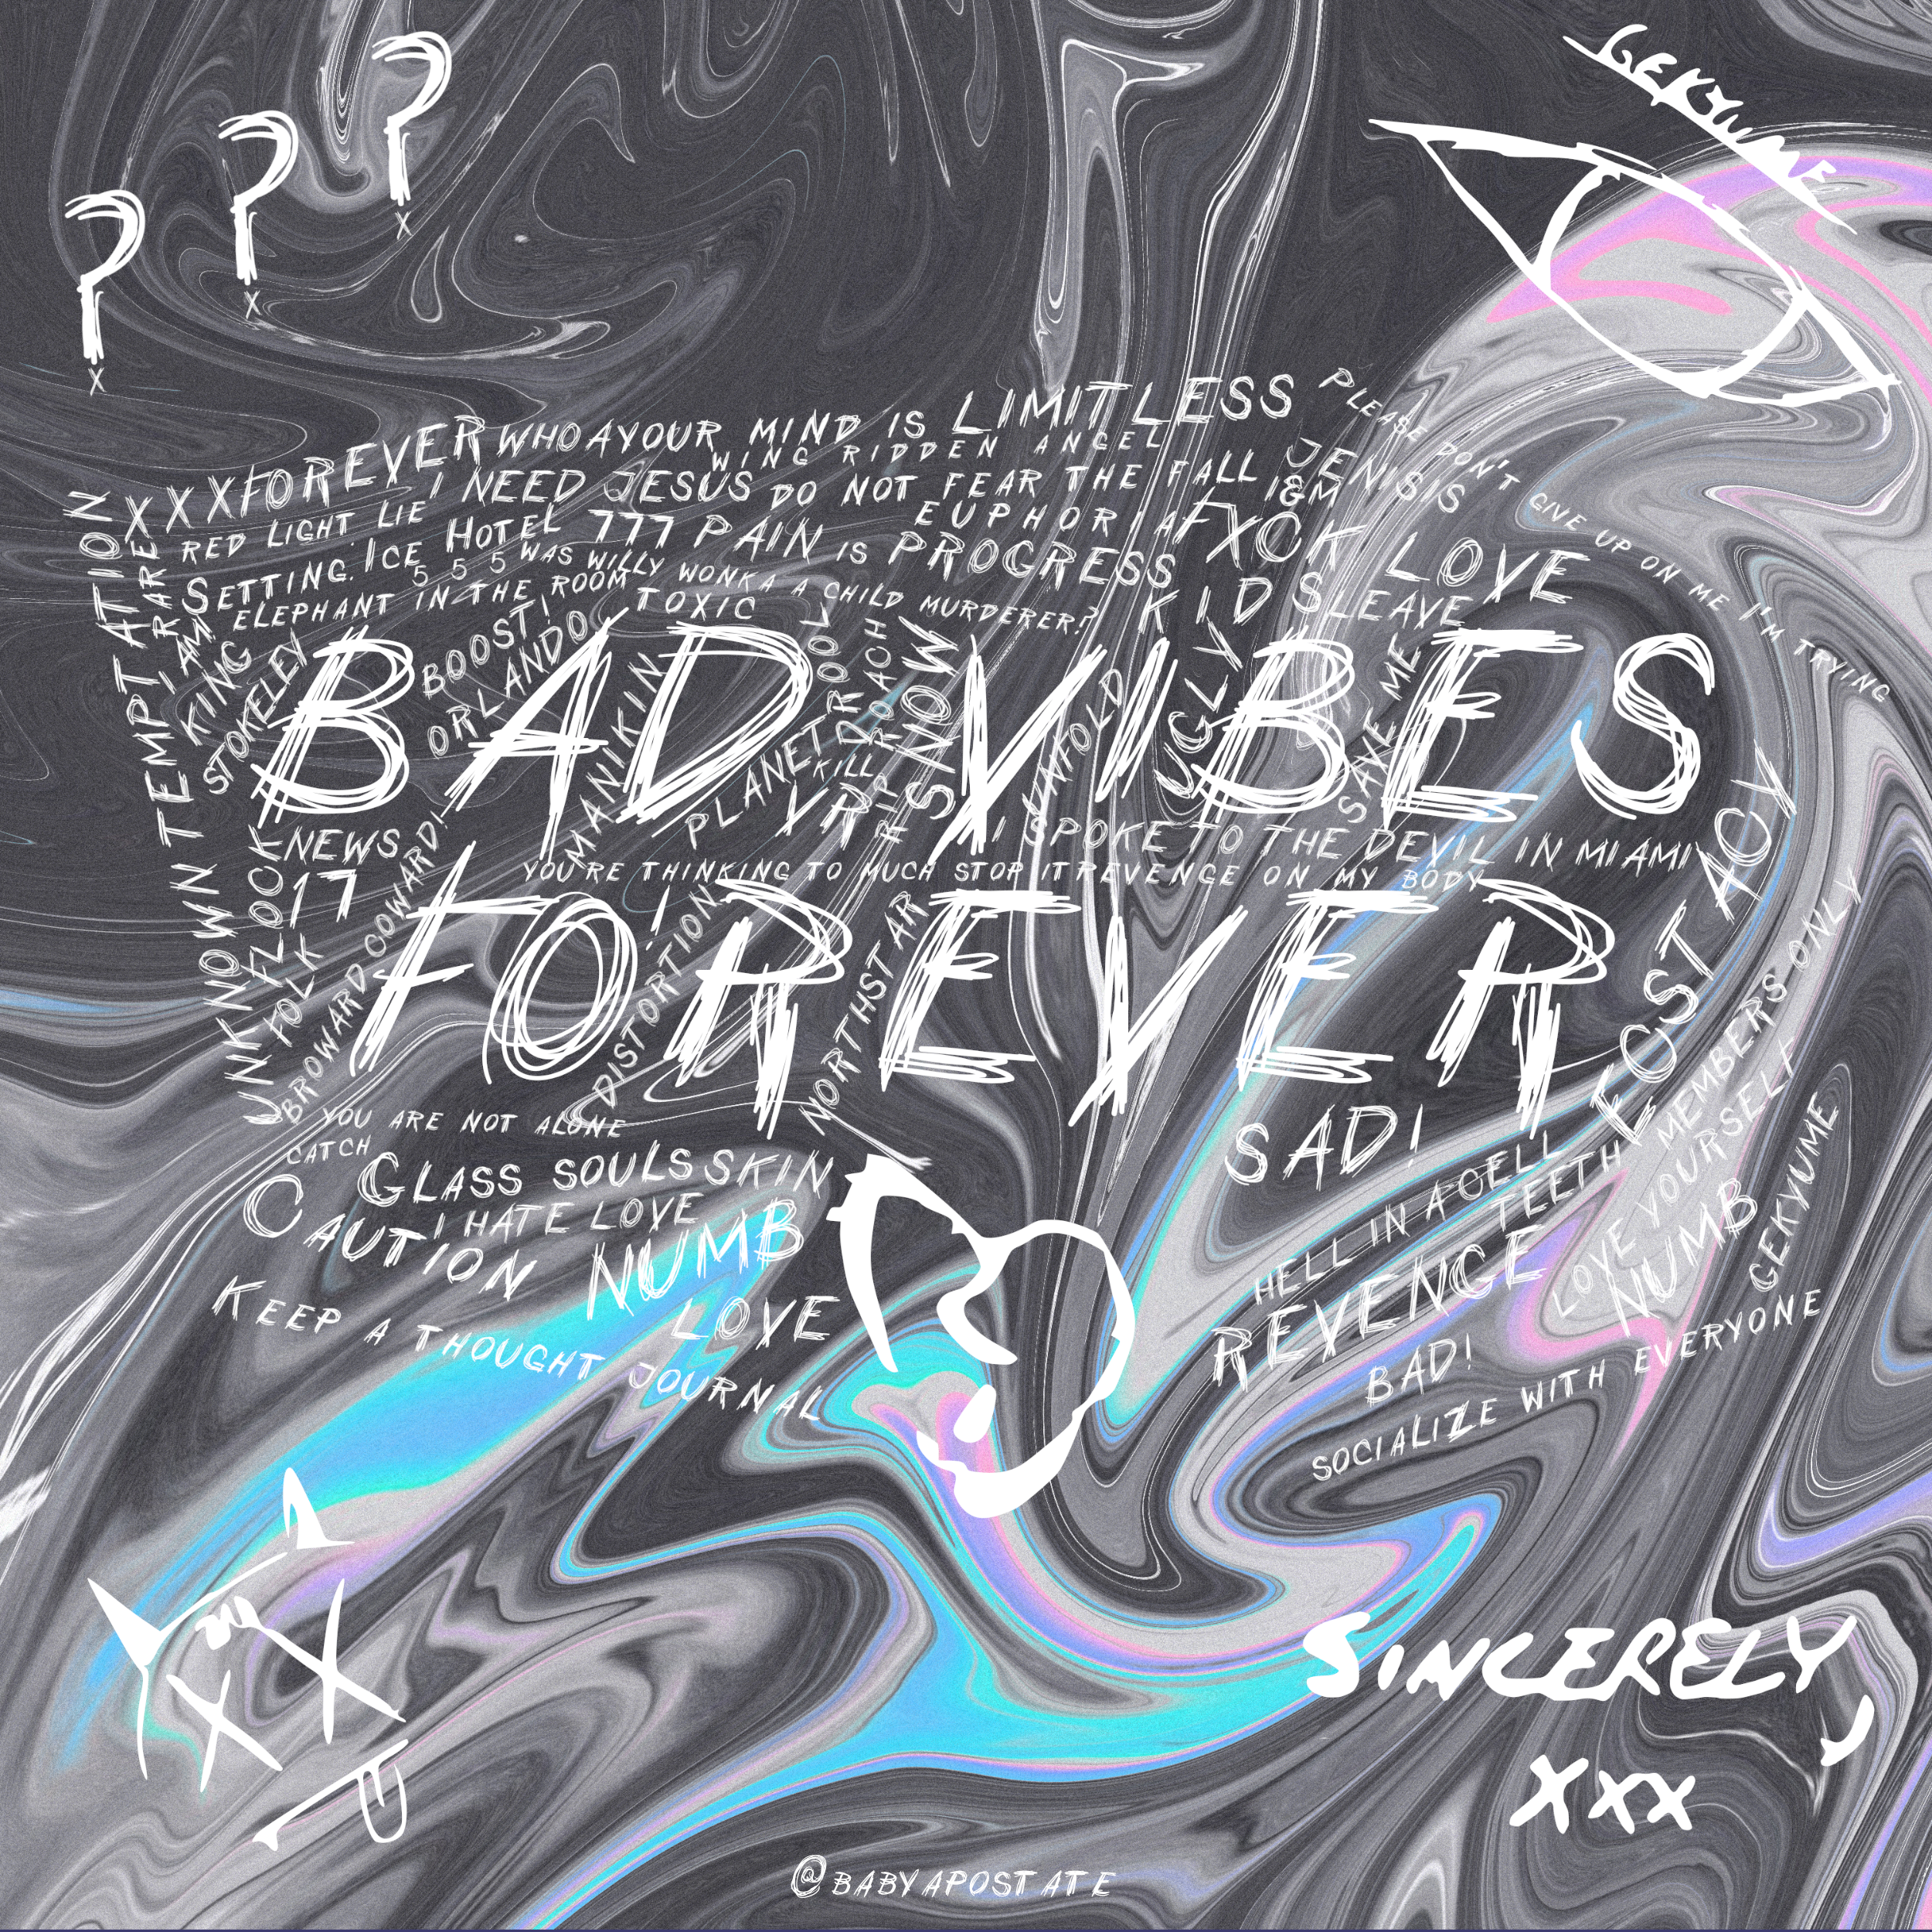 Vibes forever. Bad Vibes Forever обои. XXXTENTACION Bad Vibes Forever обложка. Bad Vibes Forever Wallpaper. Bad Vibes 999.